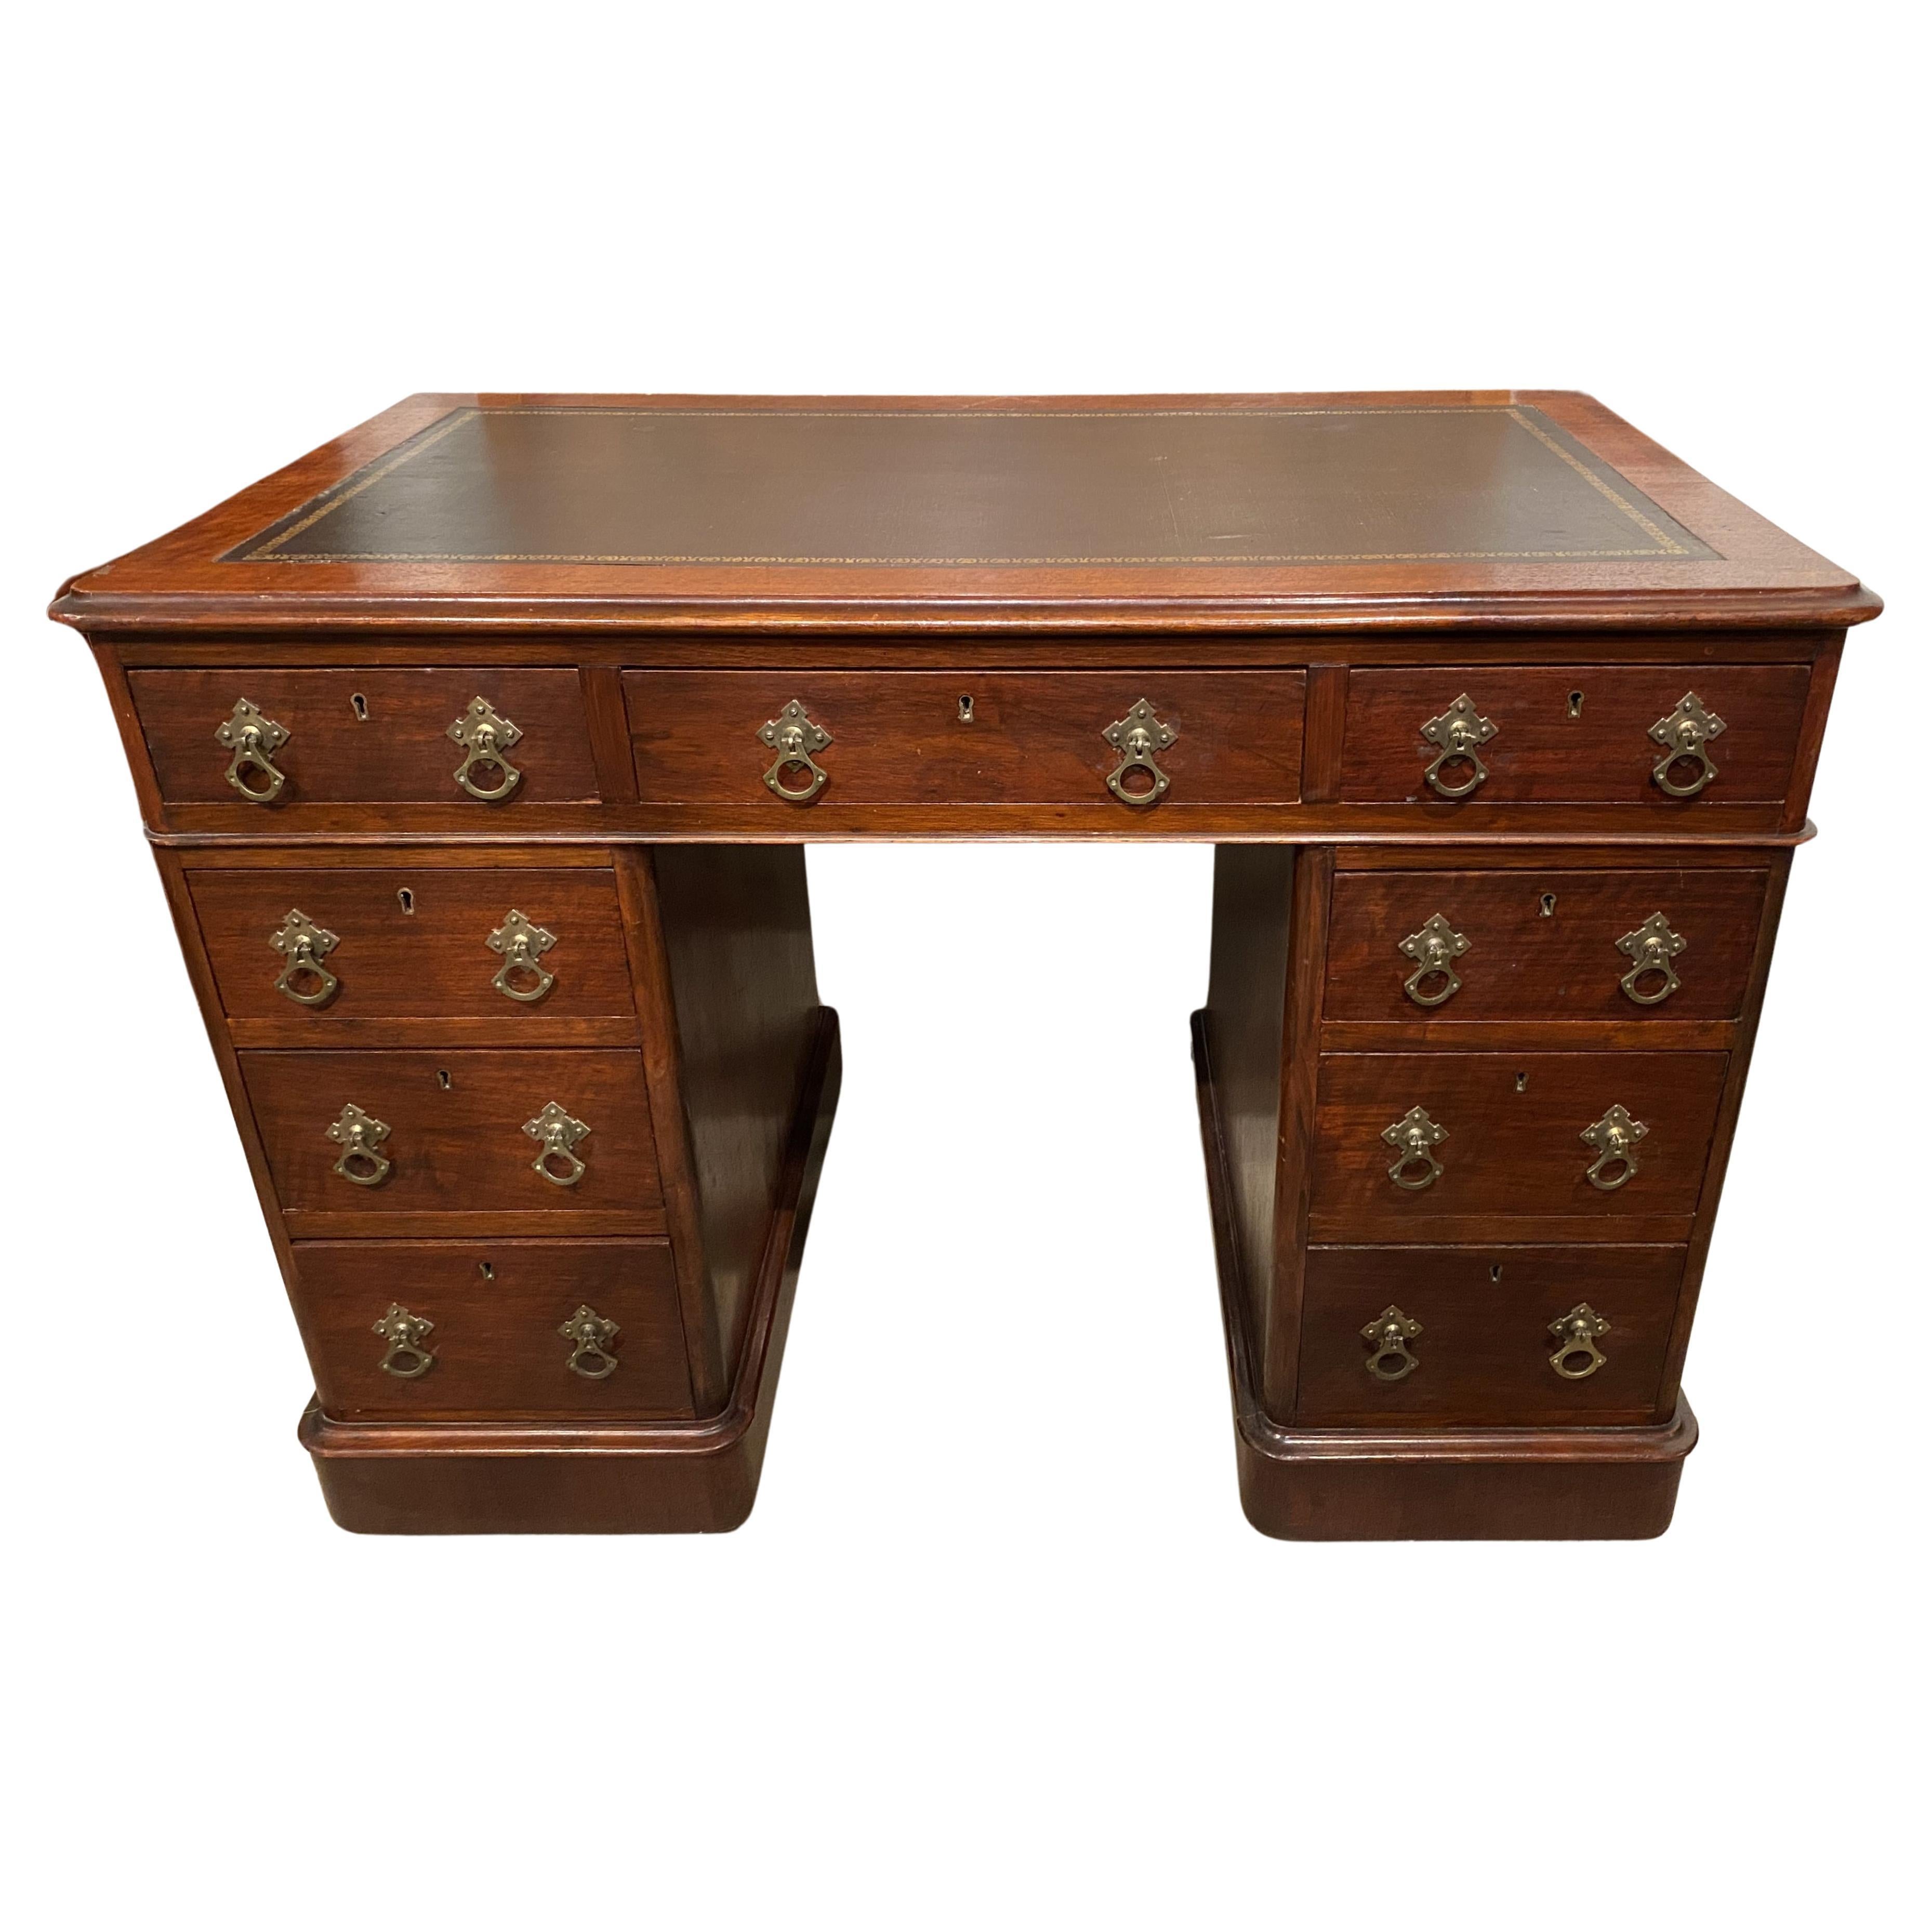 Diminutive Edwardian Mahogany Pedestal Desk with Leather Top For Sale